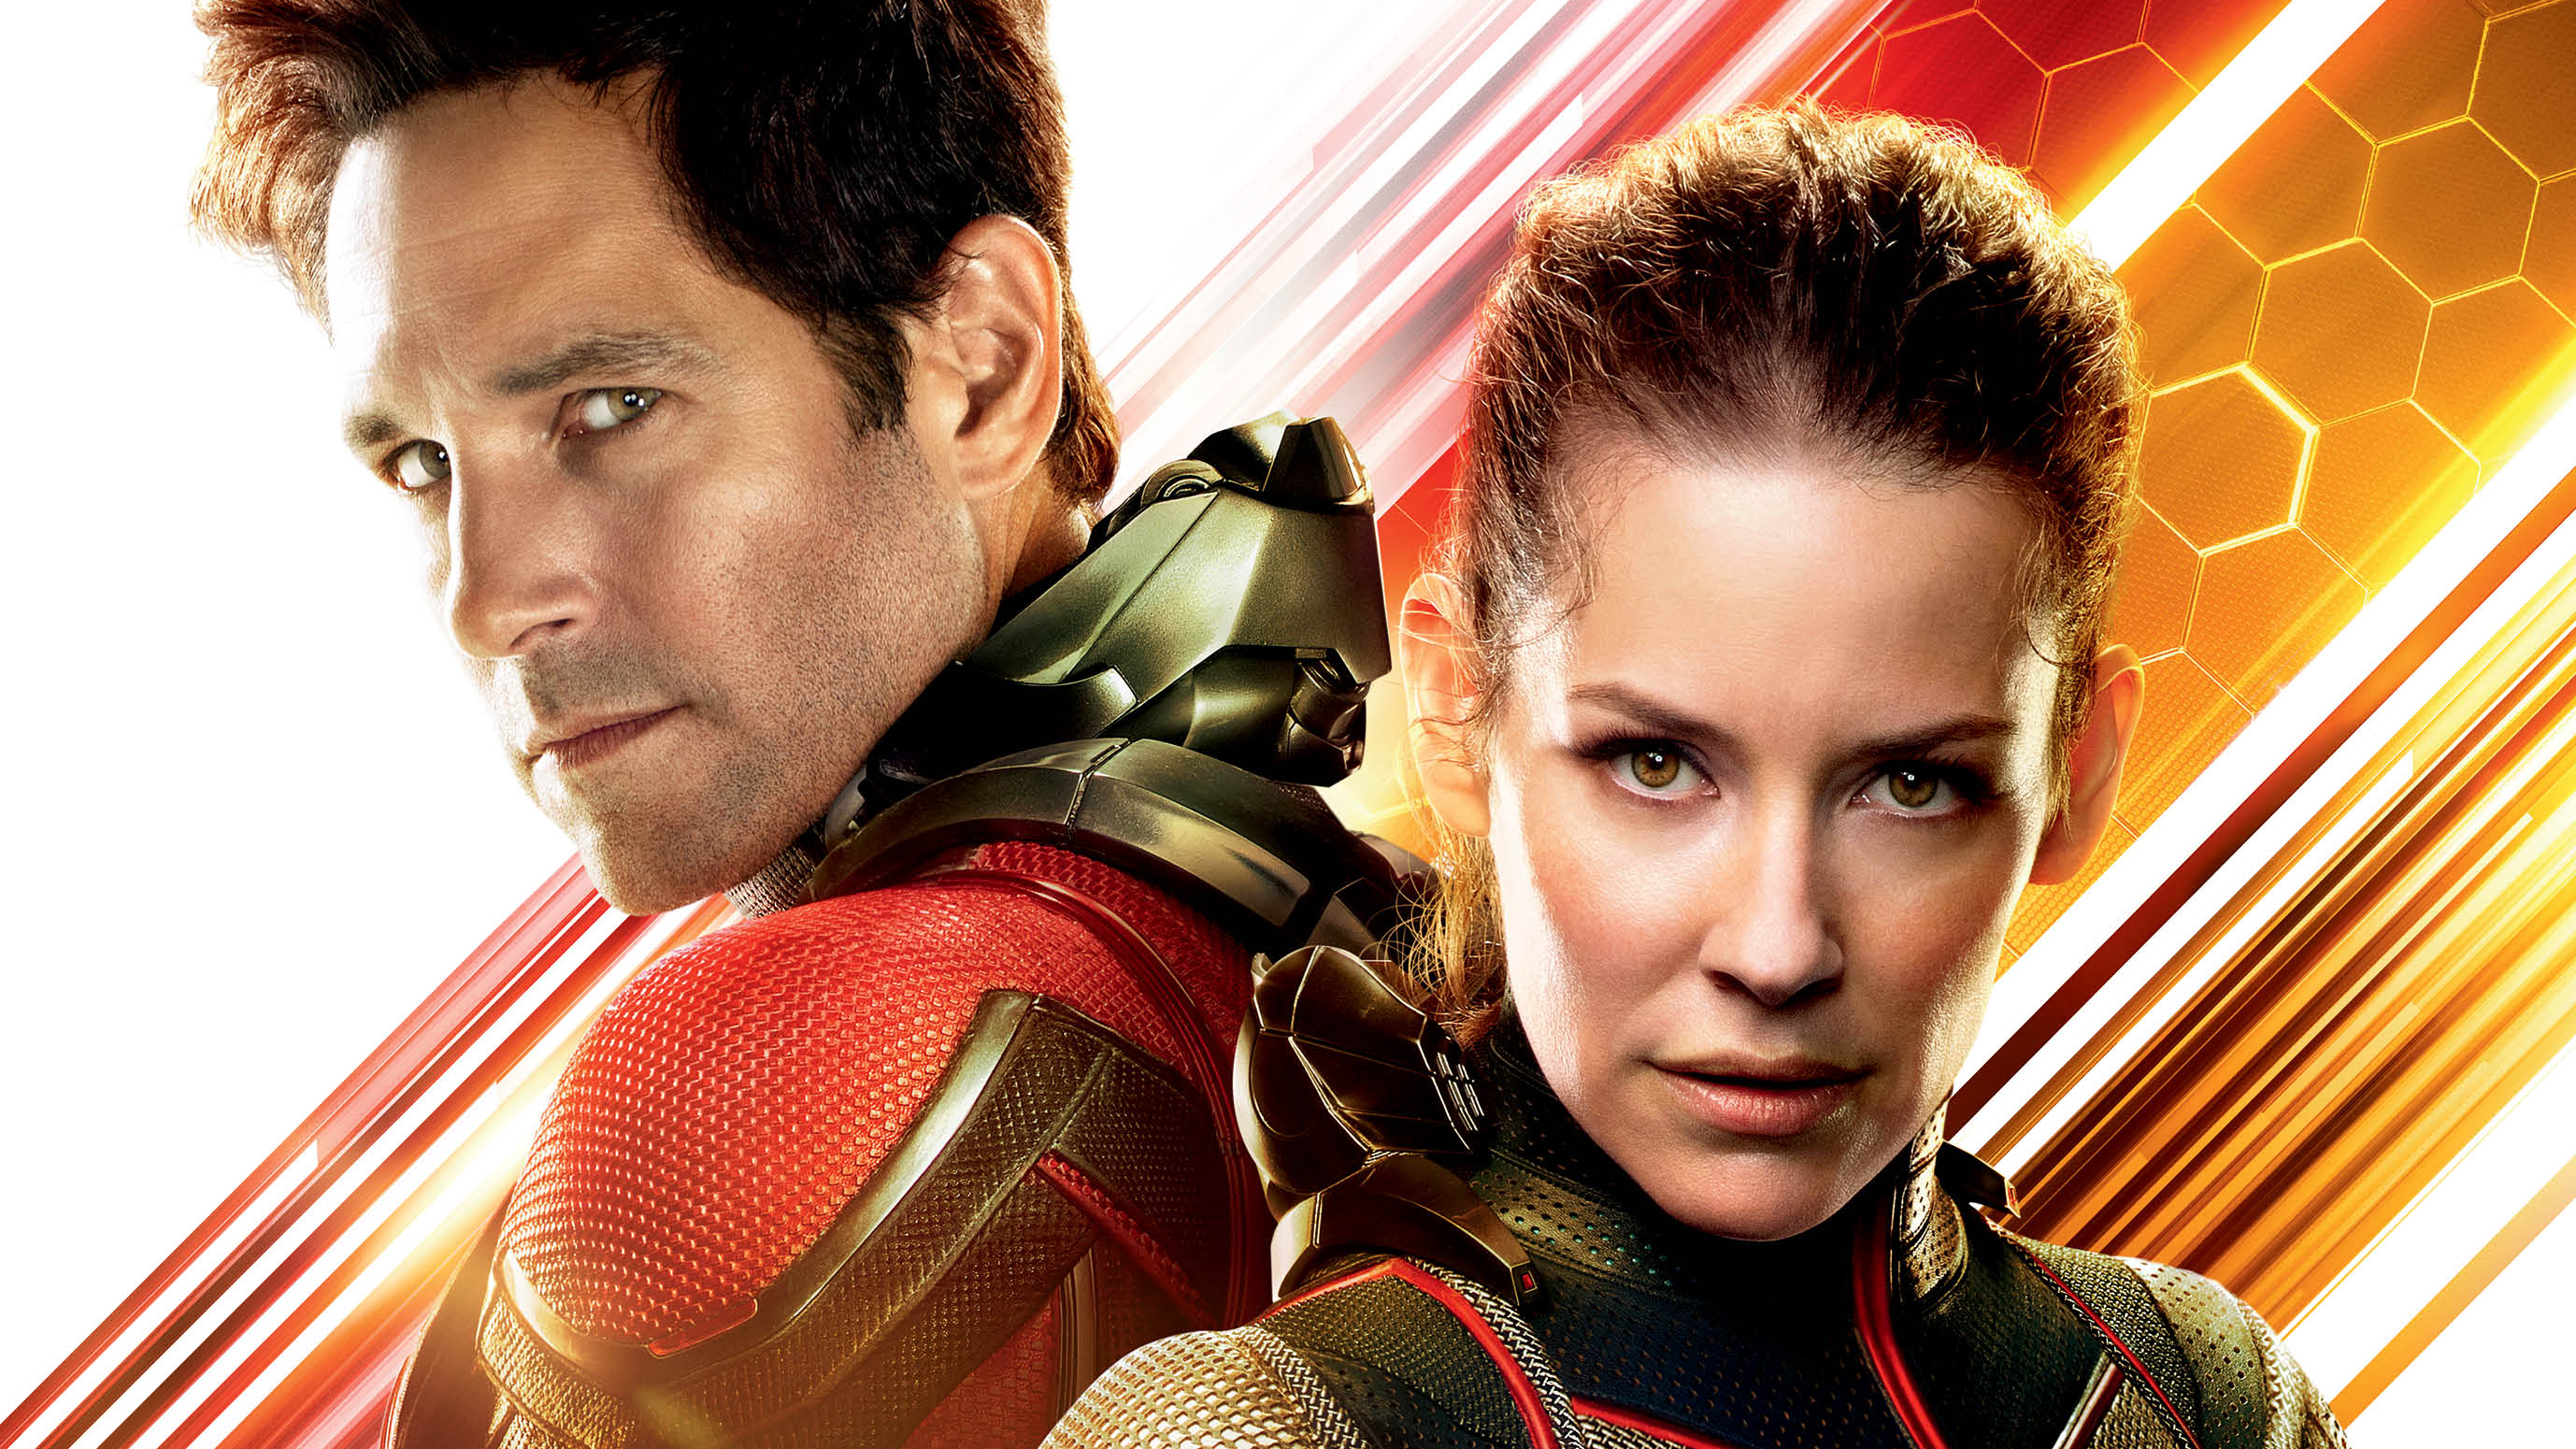 Ant-Man and the Wasp IMAX and Dolby movie posters - Hello 